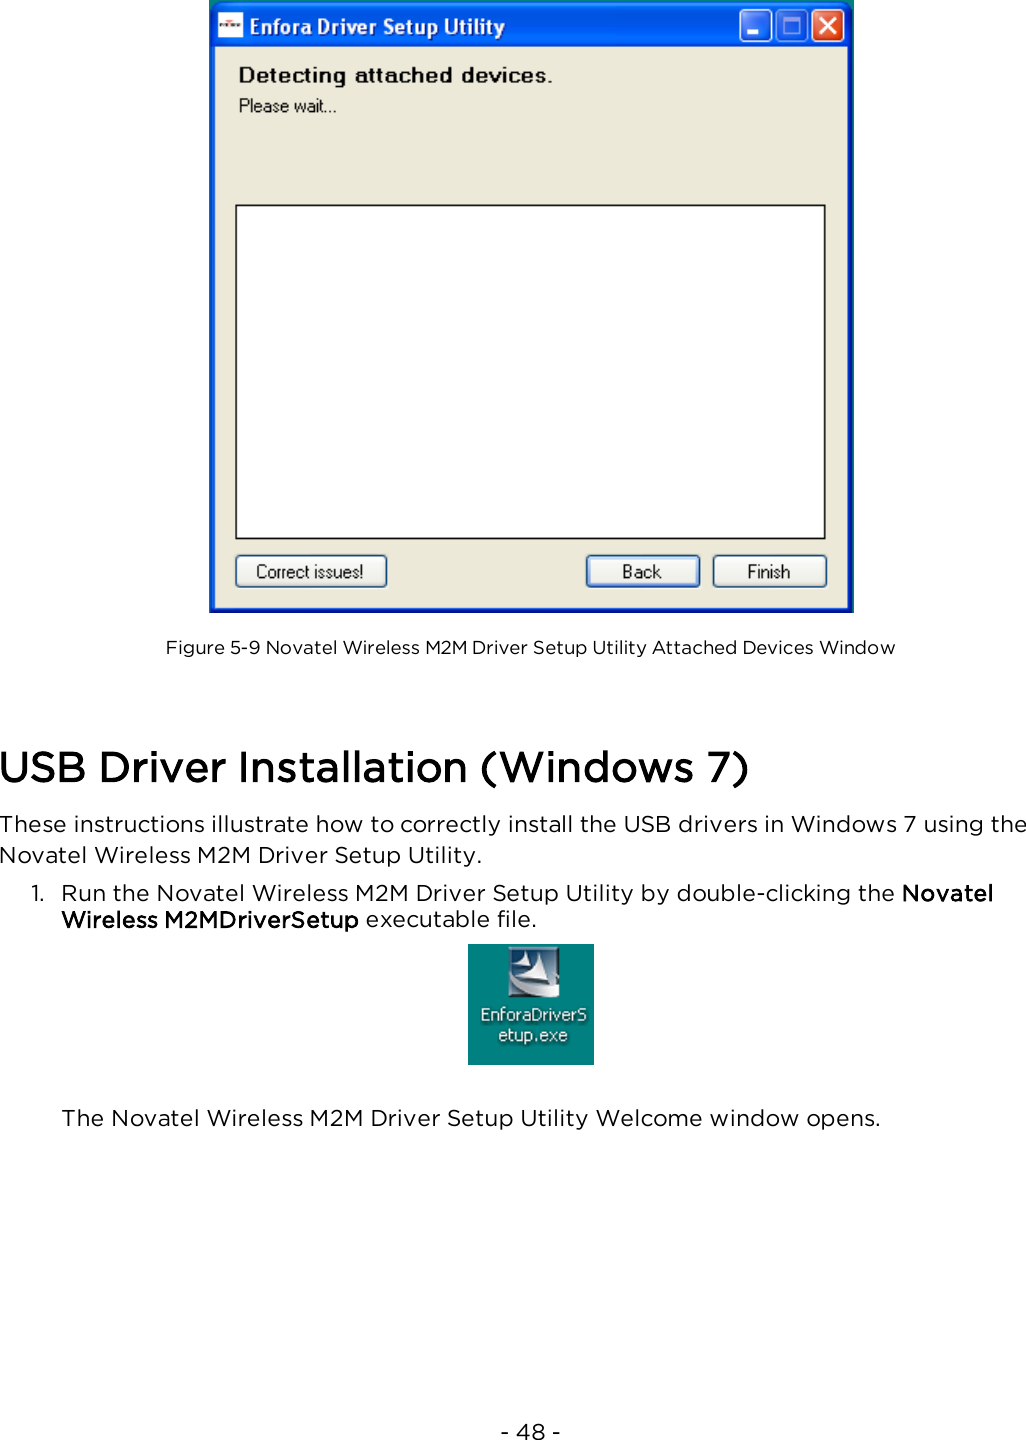 - 48 -Figure 5-9 Novatel Wireless M2M Driver Setup Utility Attached Devices WindowUSB Driver Installation (Windows 7)These instructions illustrate how to correctly install the USB drivers in Windows 7 using theNovatel Wireless M2M Driver Setup Utility.1. Run the Novatel Wireless M2M Driver Setup Utility by double-clicking the NovatelWireless M2MDriverSetup executable file.The Novatel Wireless M2M Driver Setup Utility Welcome window opens.